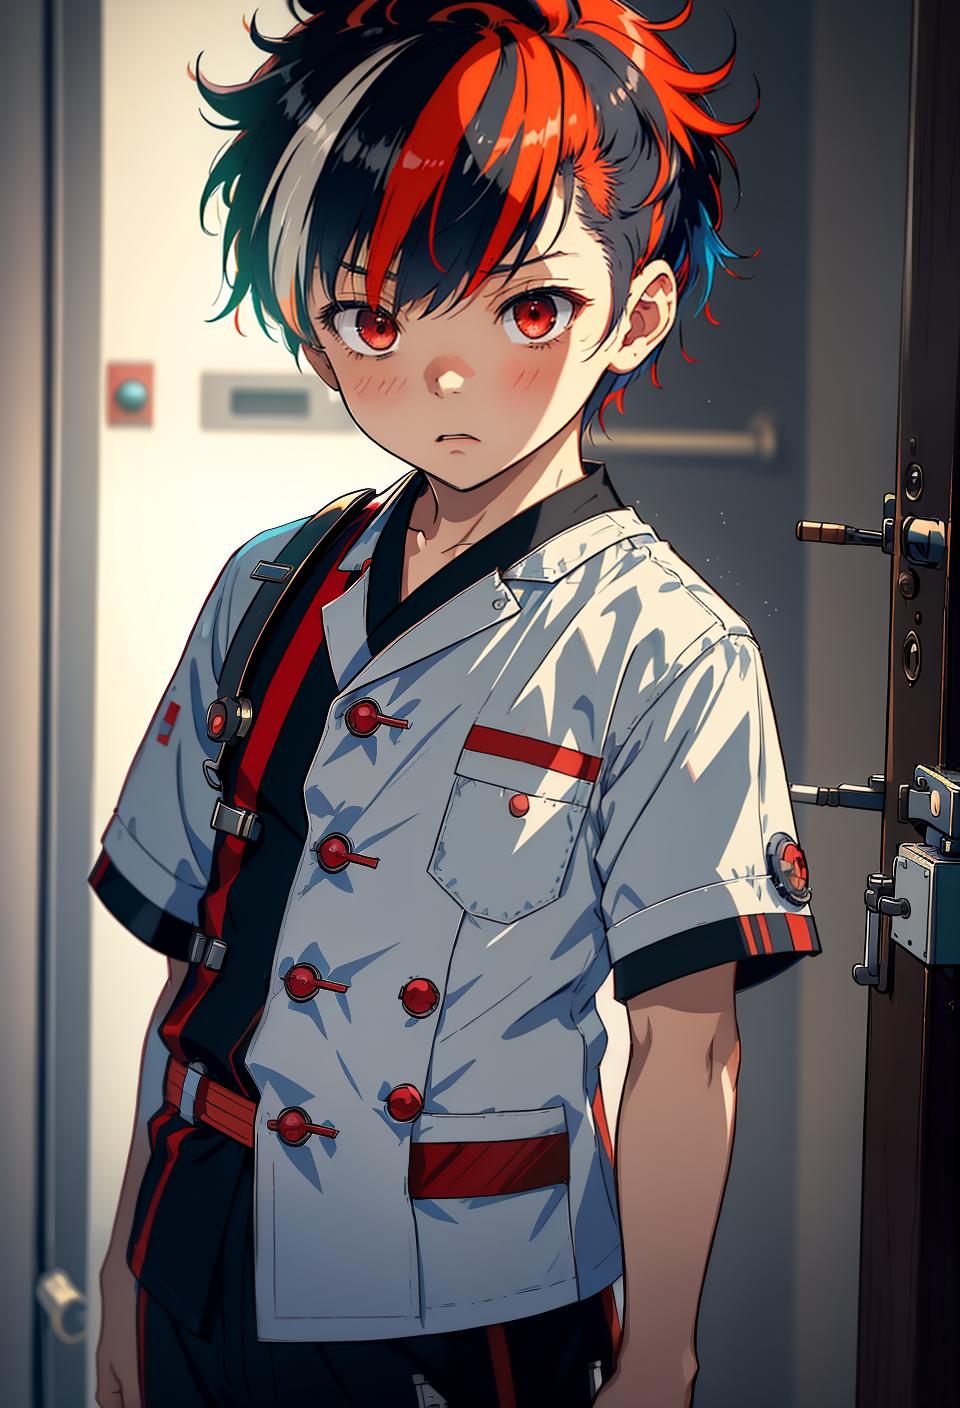  ((trending, highres, masterpiece, cinematic shot)), 1boy, chibi, male World War II outfit, hospital scene, very short spiked multicolored hair, bangs covering eyes, narrow red eyes, calm personality, mischievous expression, fair skin, lively, observant